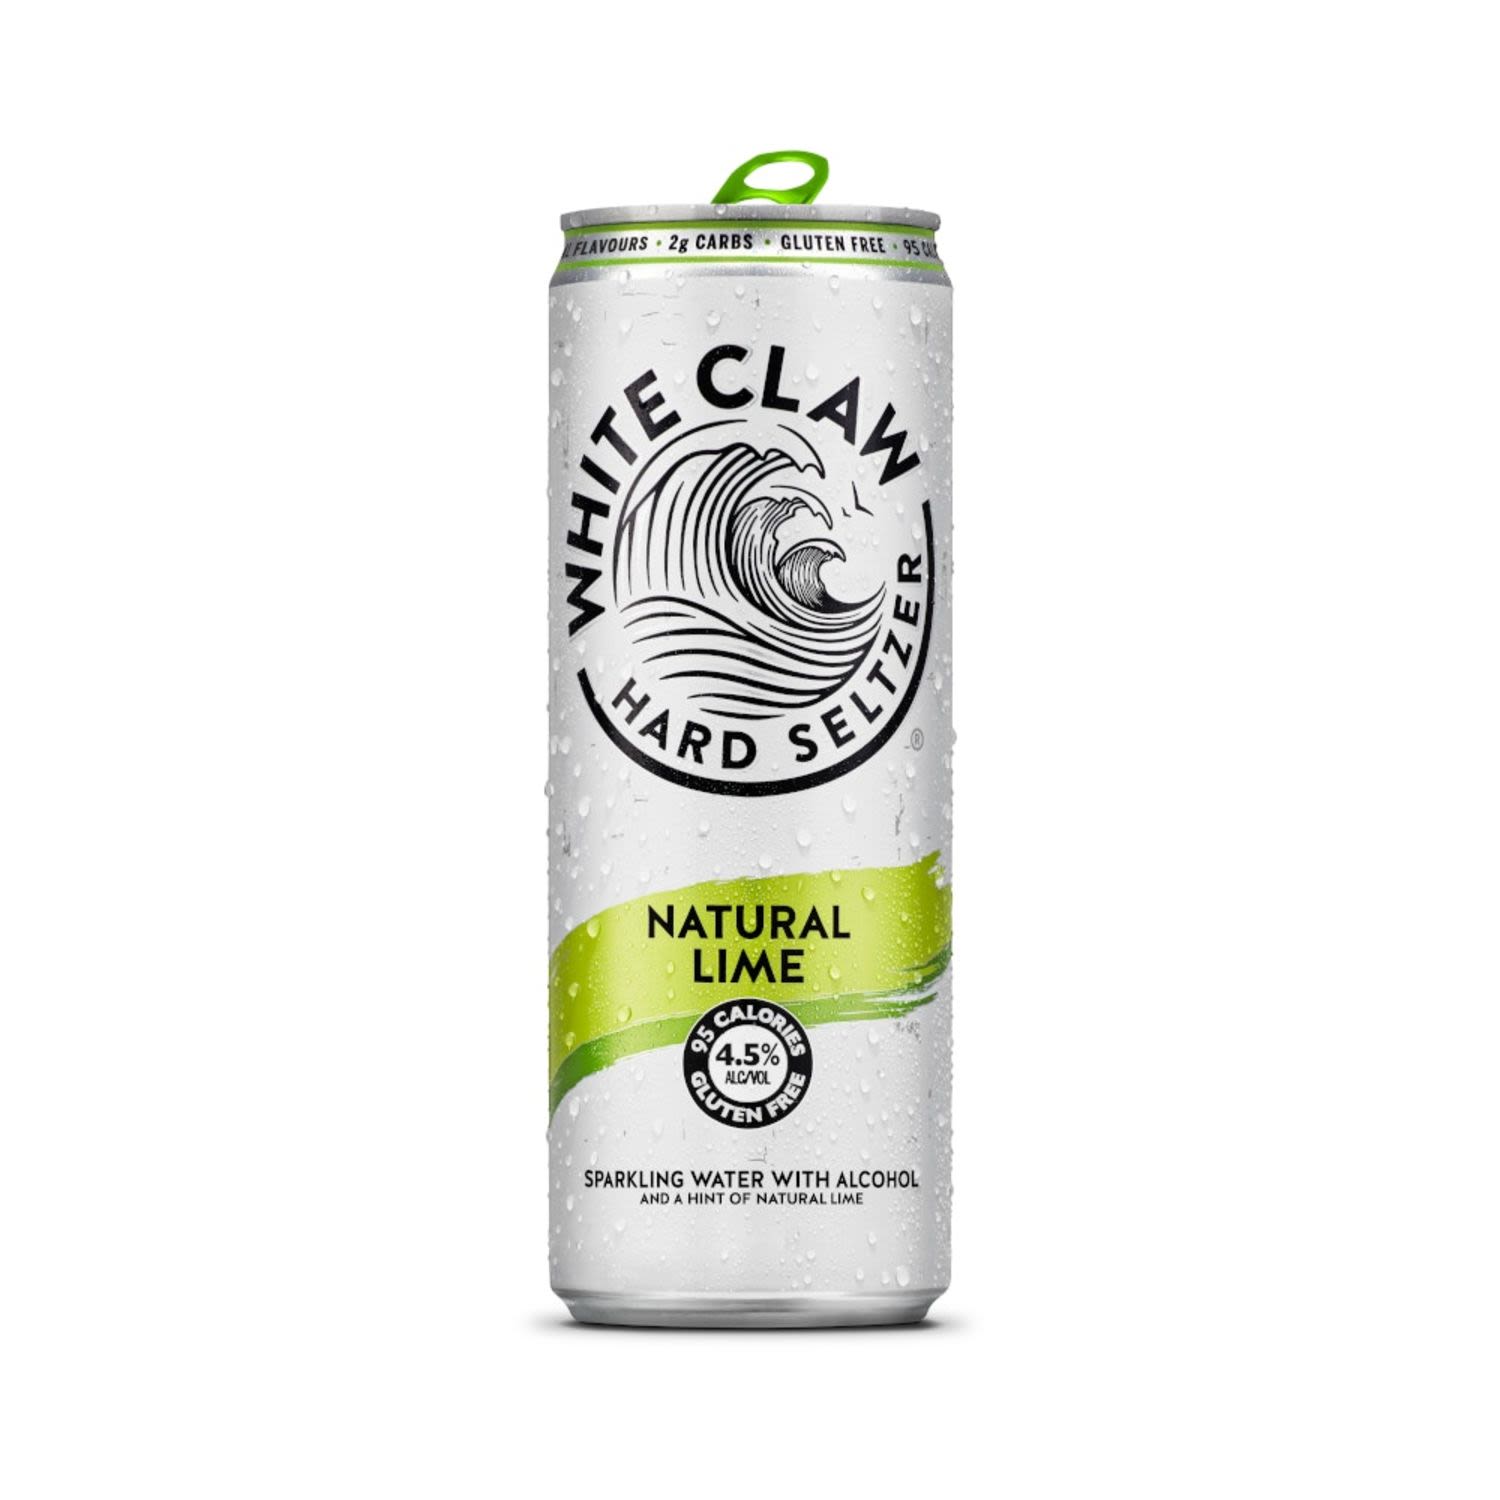 The fresh flavor of Natural Lime can’t be ignored. Every sip is met with a purely refreshing, zesty citrus aroma and a clean, crisp finish.<br /> <br />Alcohol Volume: 4.50%<br /><br />Pack Format: Can<br /><br />Standard Drinks: 1.2</br /><br />Pack Type: Can<br />